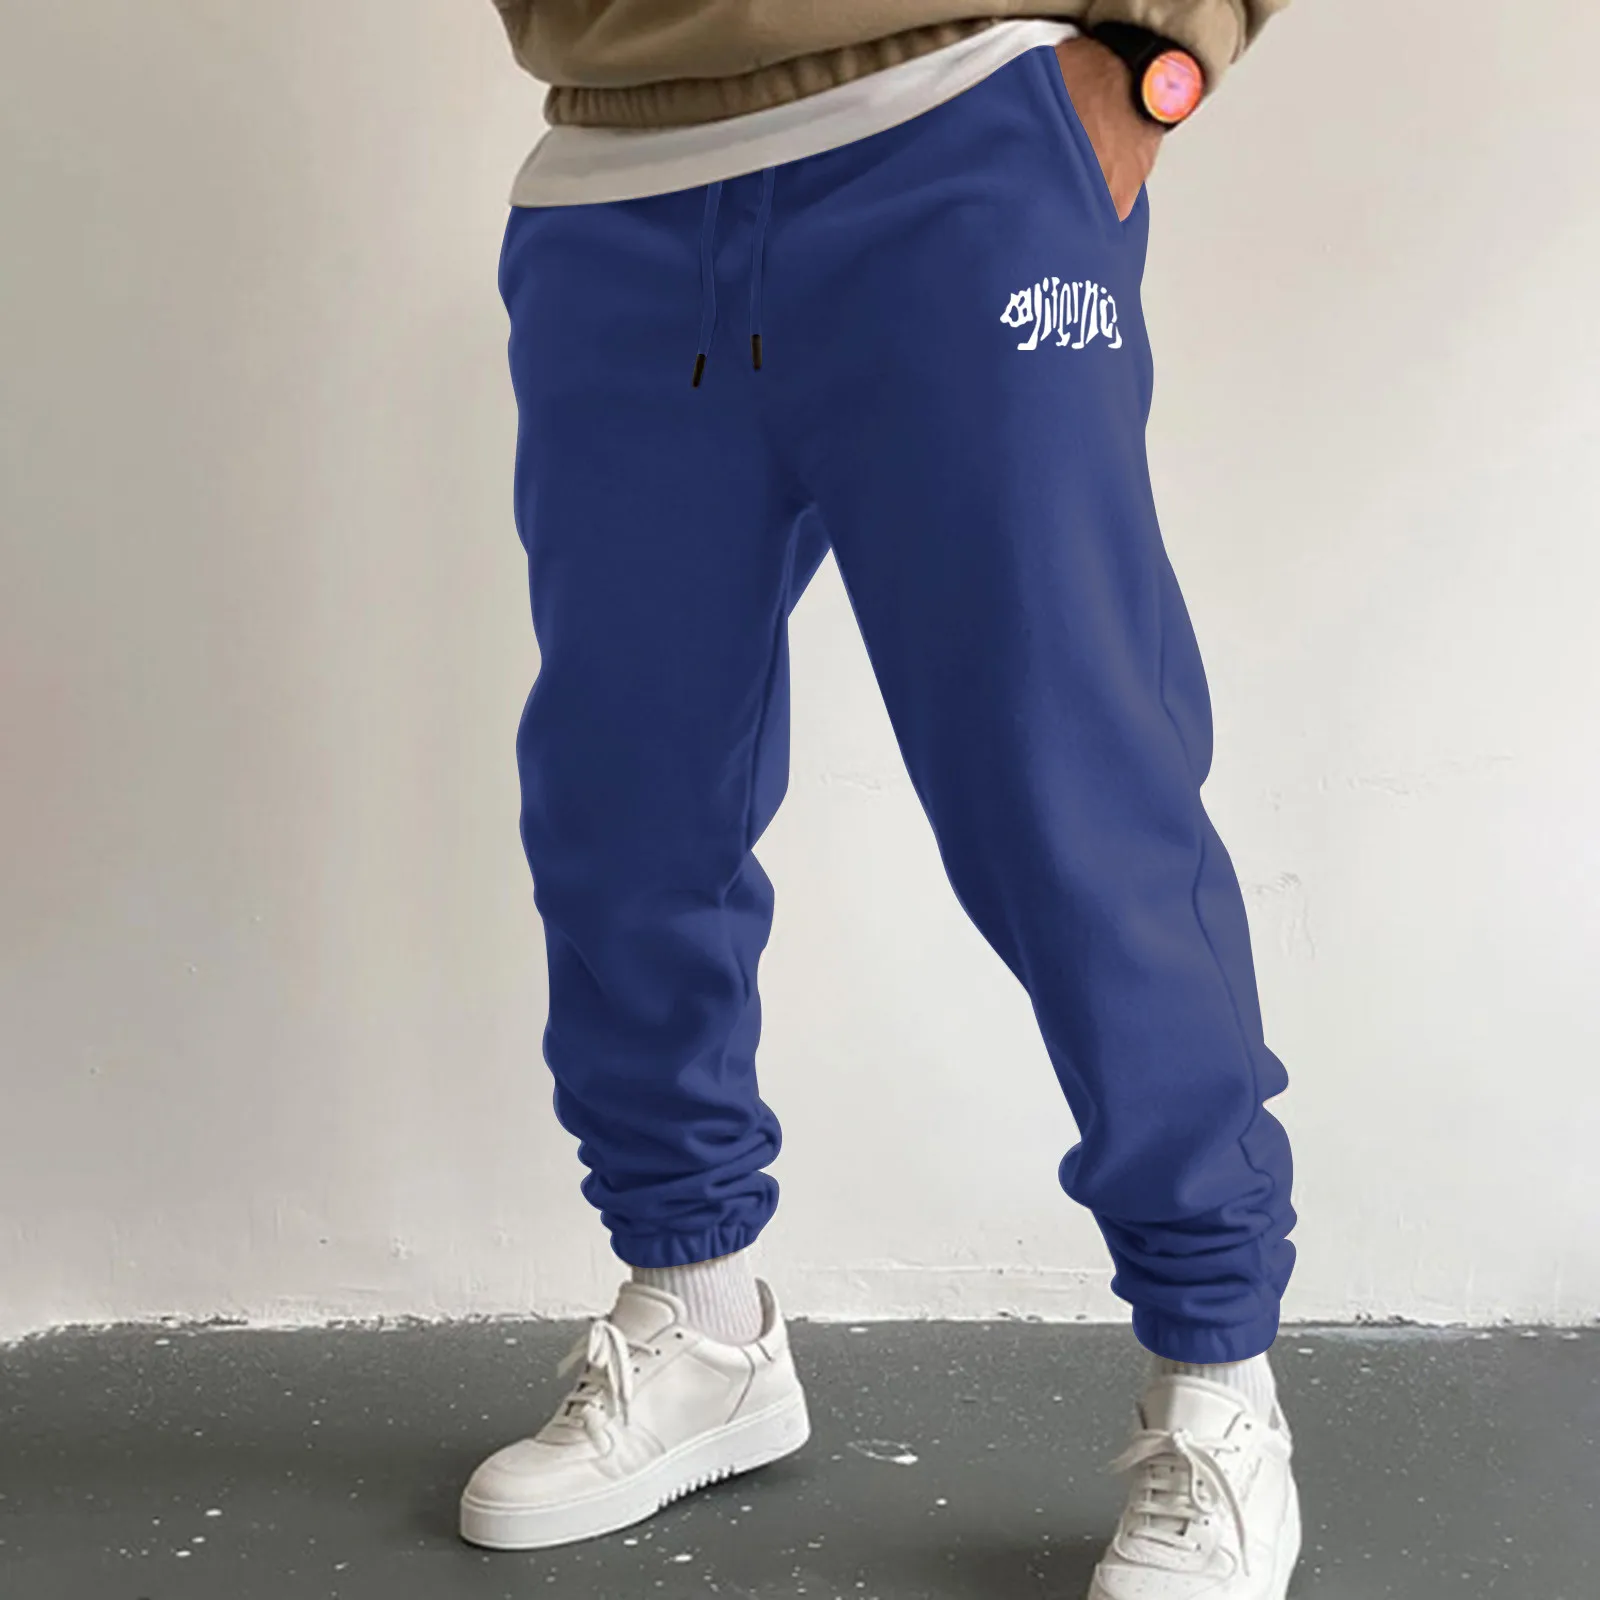 White Sweatpants For Men Mens Autumn And Winter High Street Fashion Leisure  Loose Sports Running Solid Color Lace Up Pants Sweater Pants Trousers